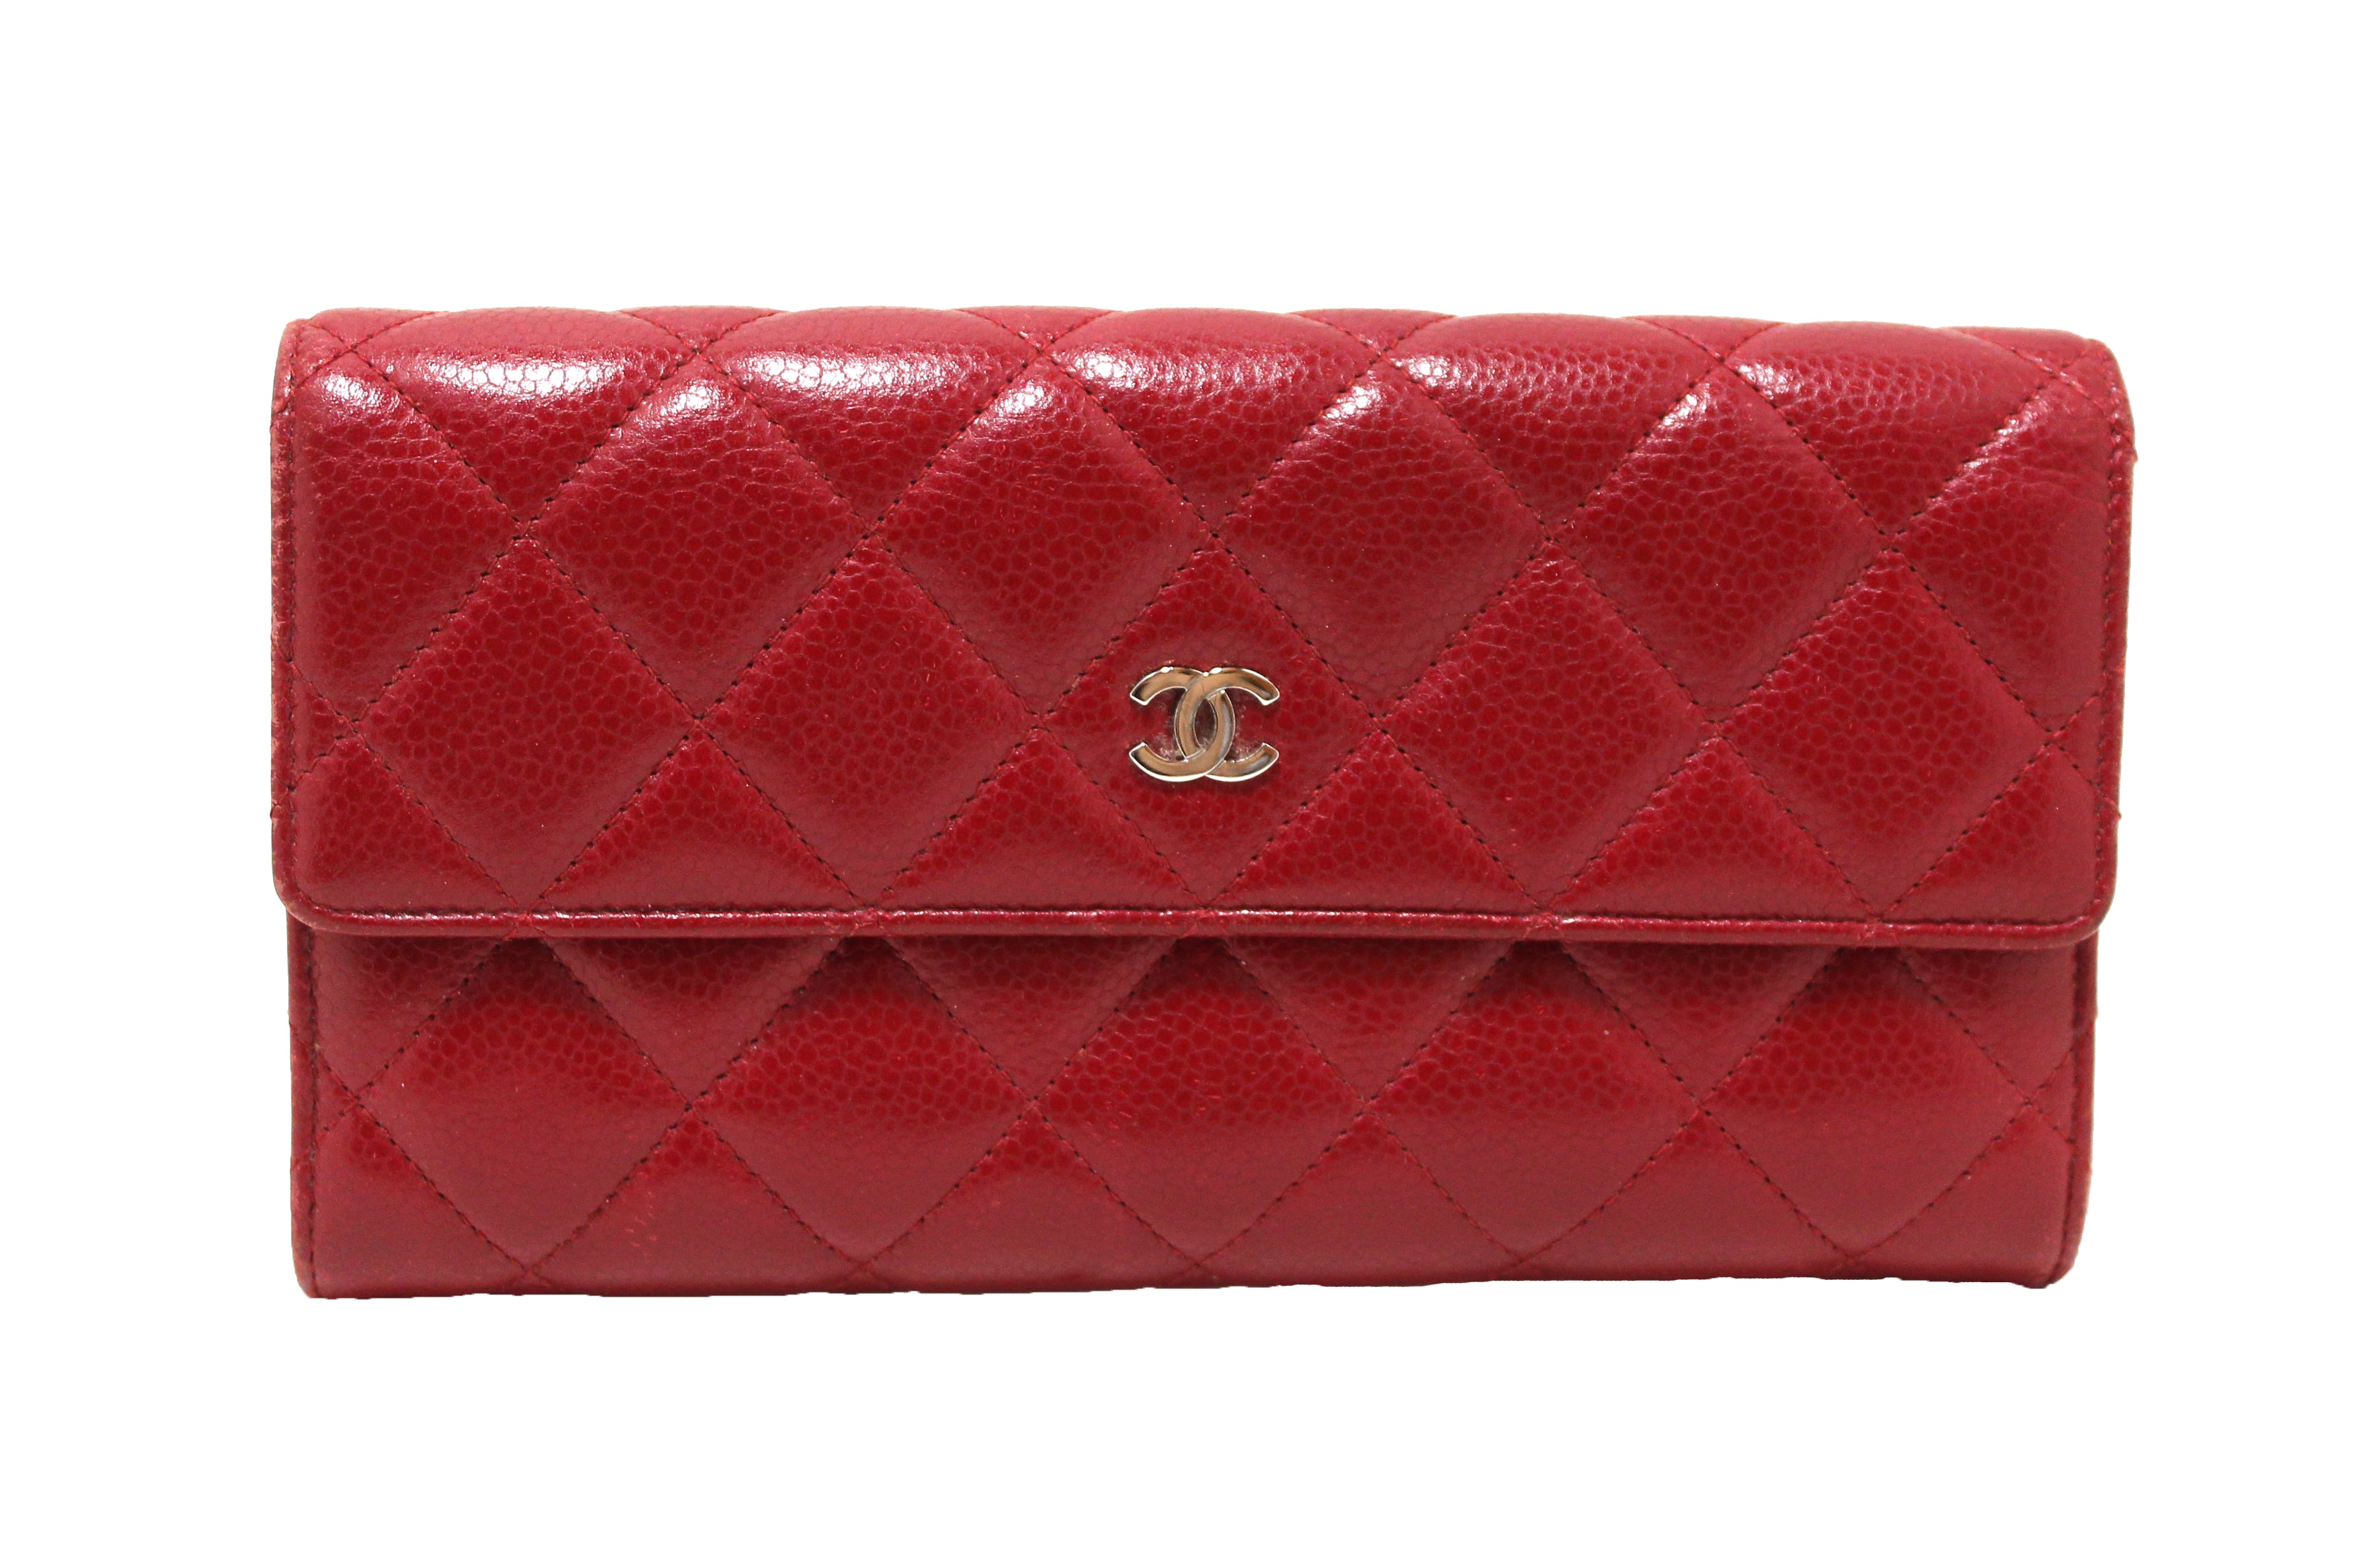 chanel red color wallet